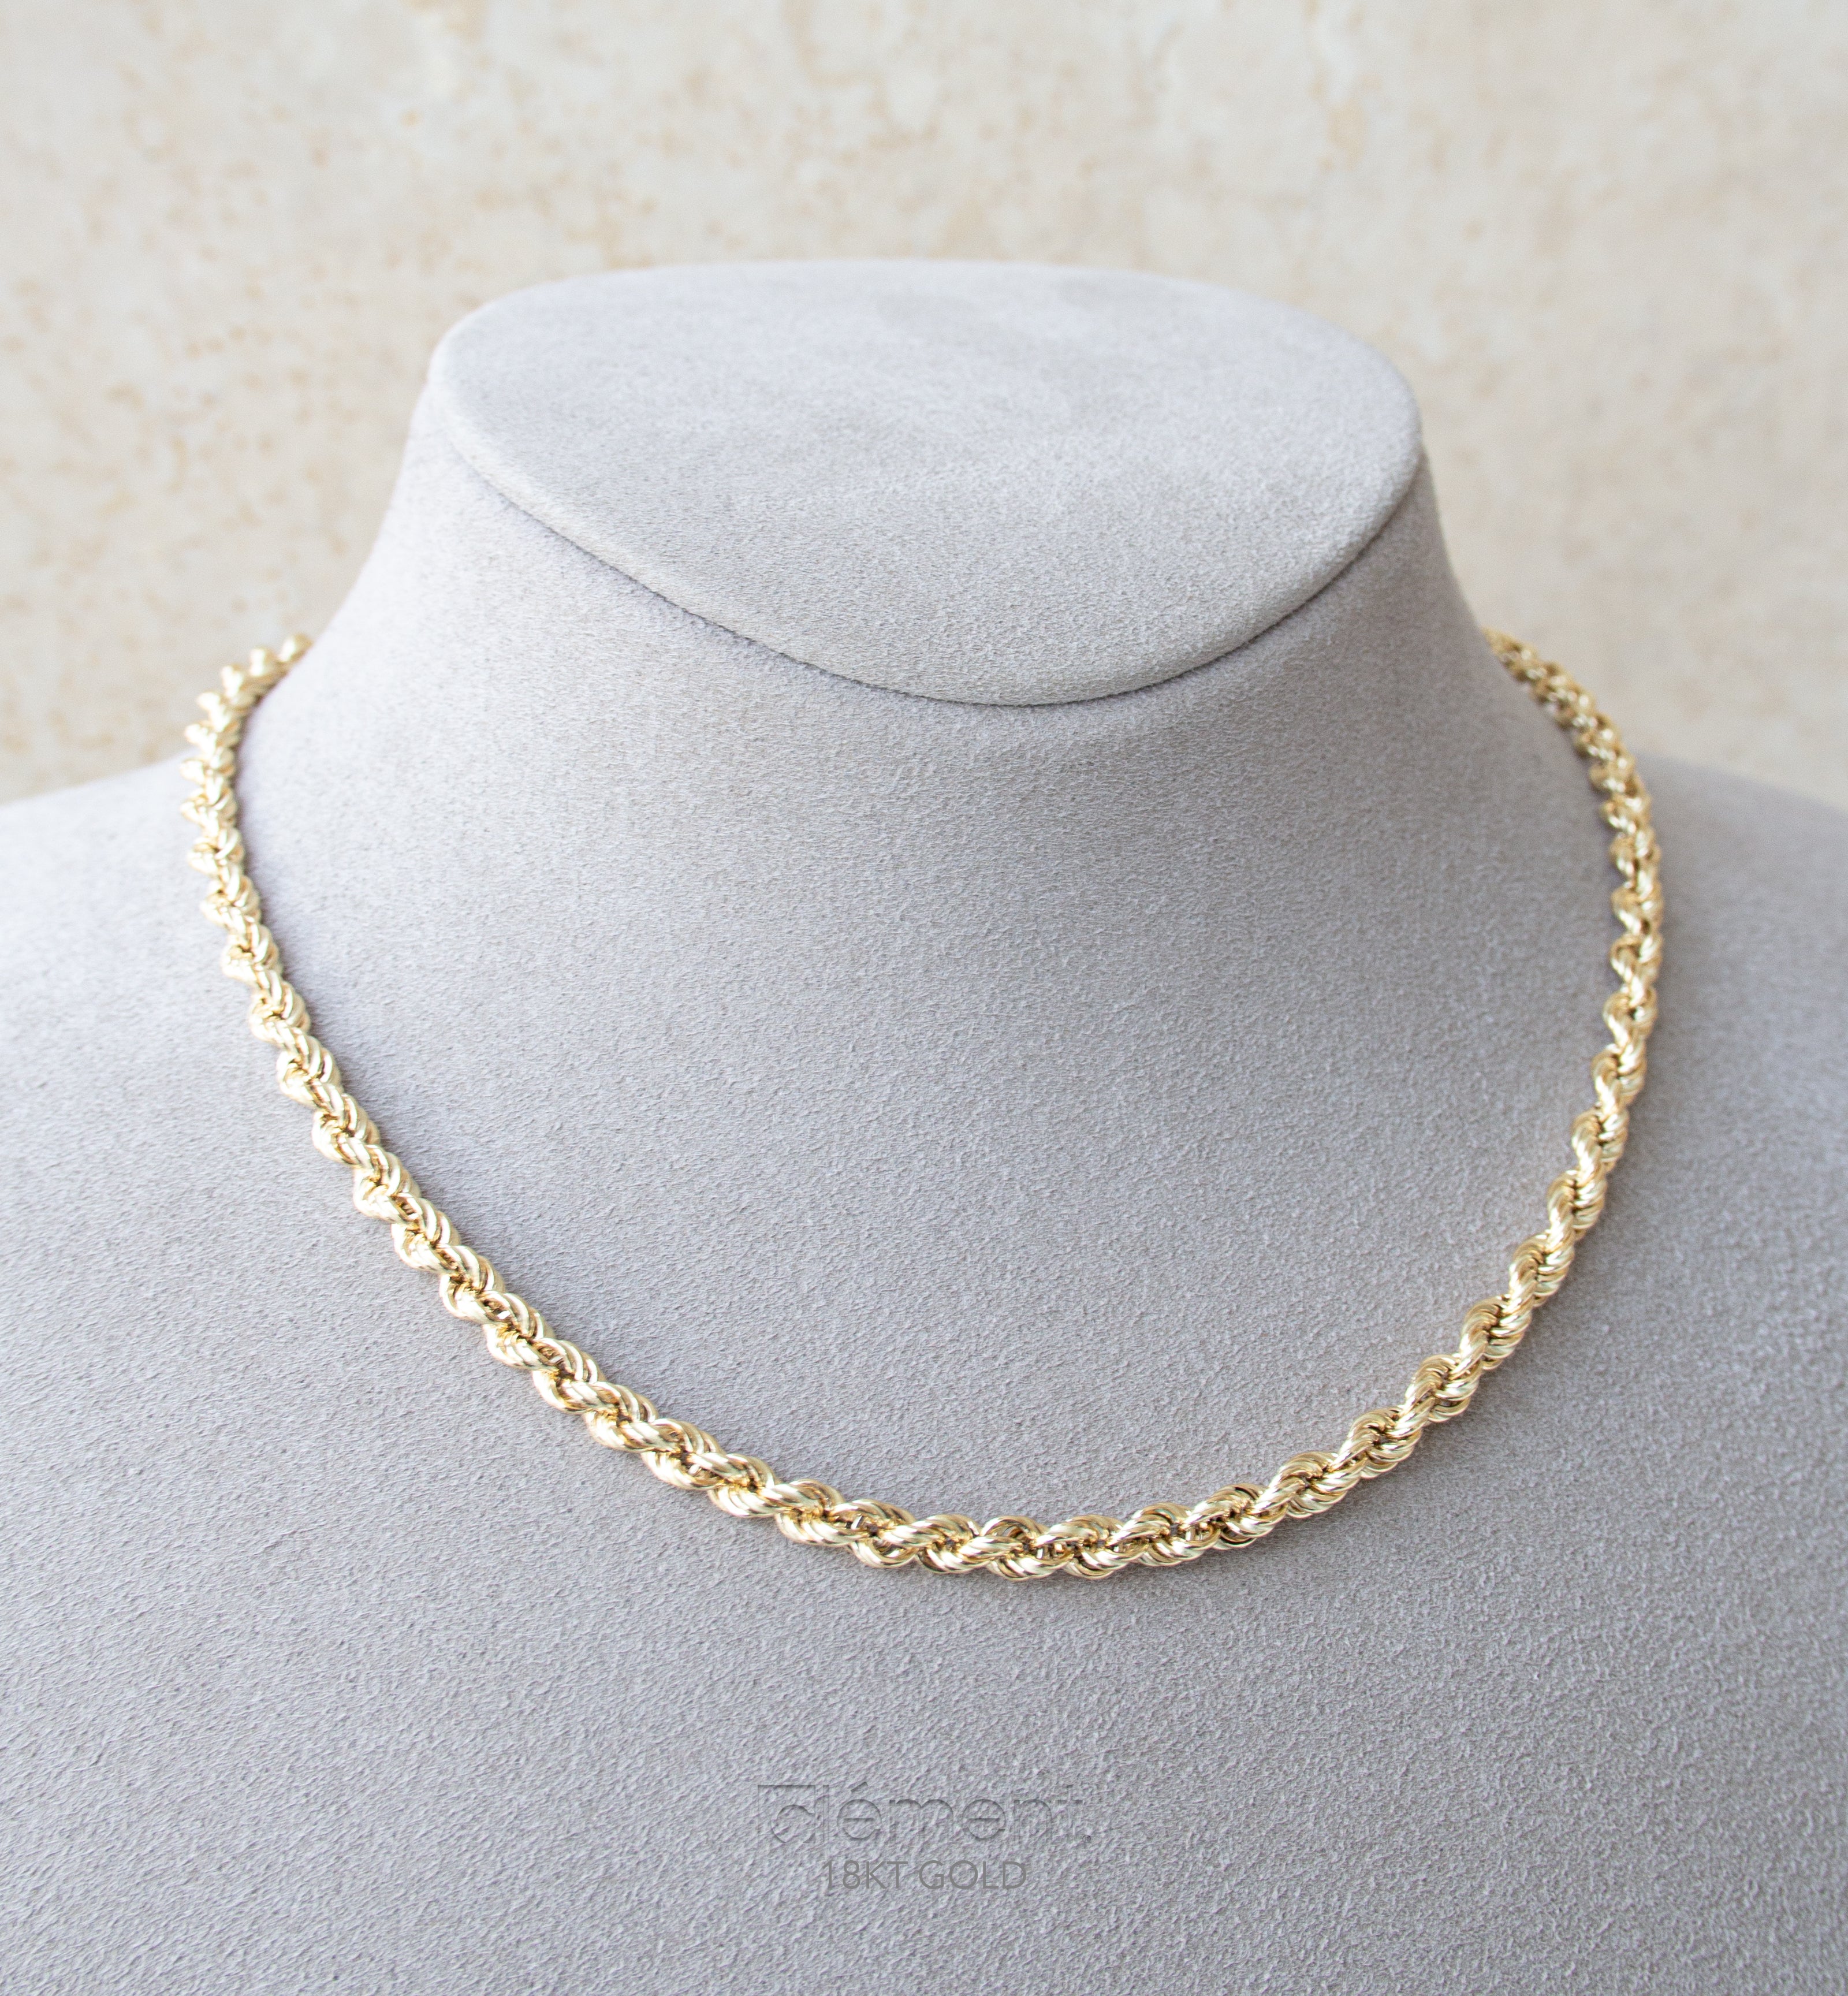 18ct Yellow Gold Rope Necklace